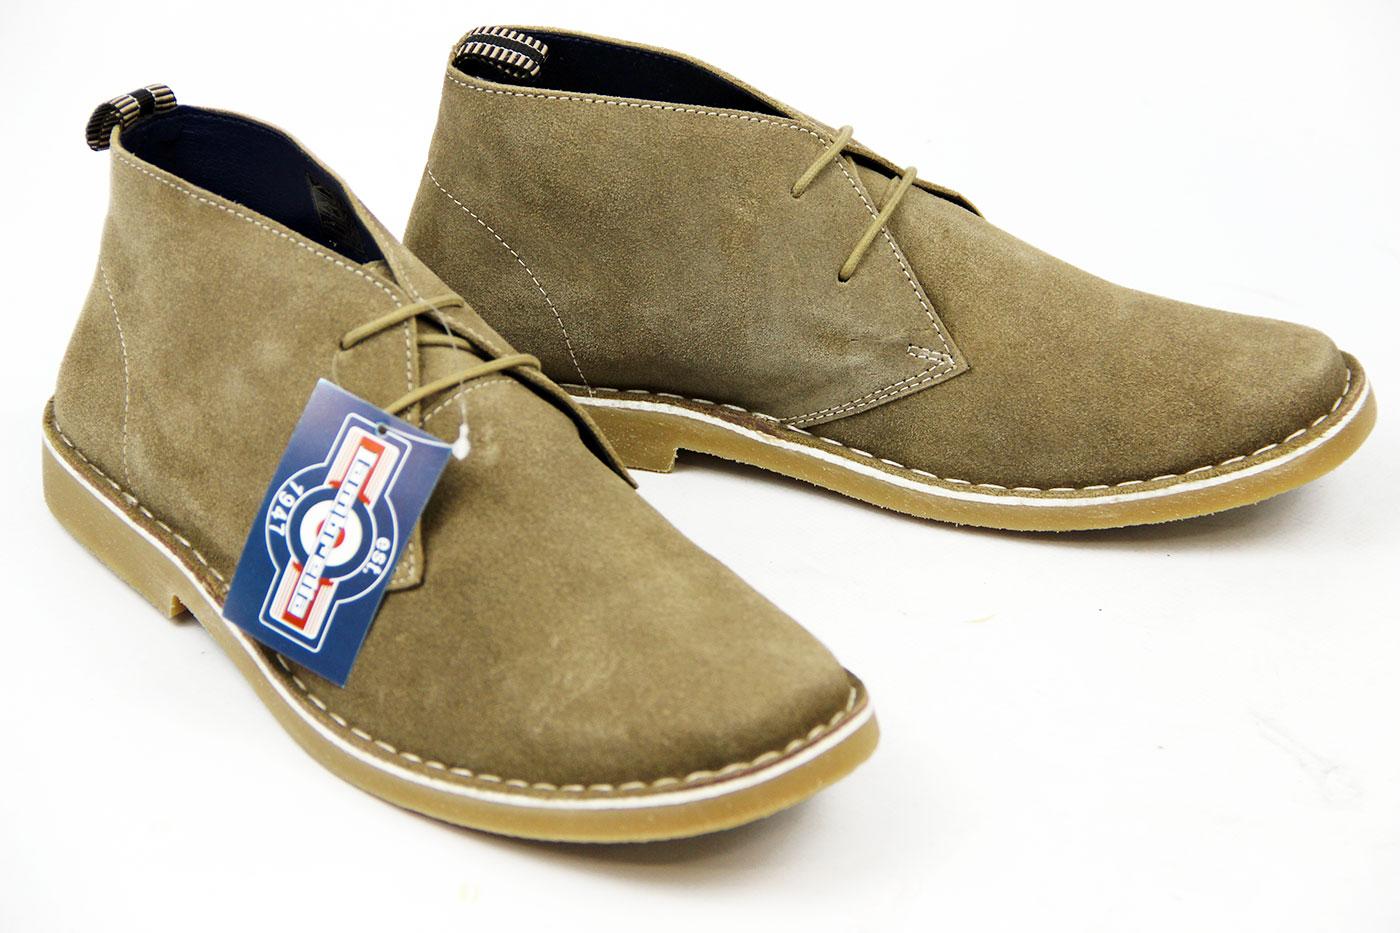 LAMBRETTA BRIGHTON MENS LACE UP CASUAL BEIGE SUEDE LEATHER DESERT ANKLE BOOTS 